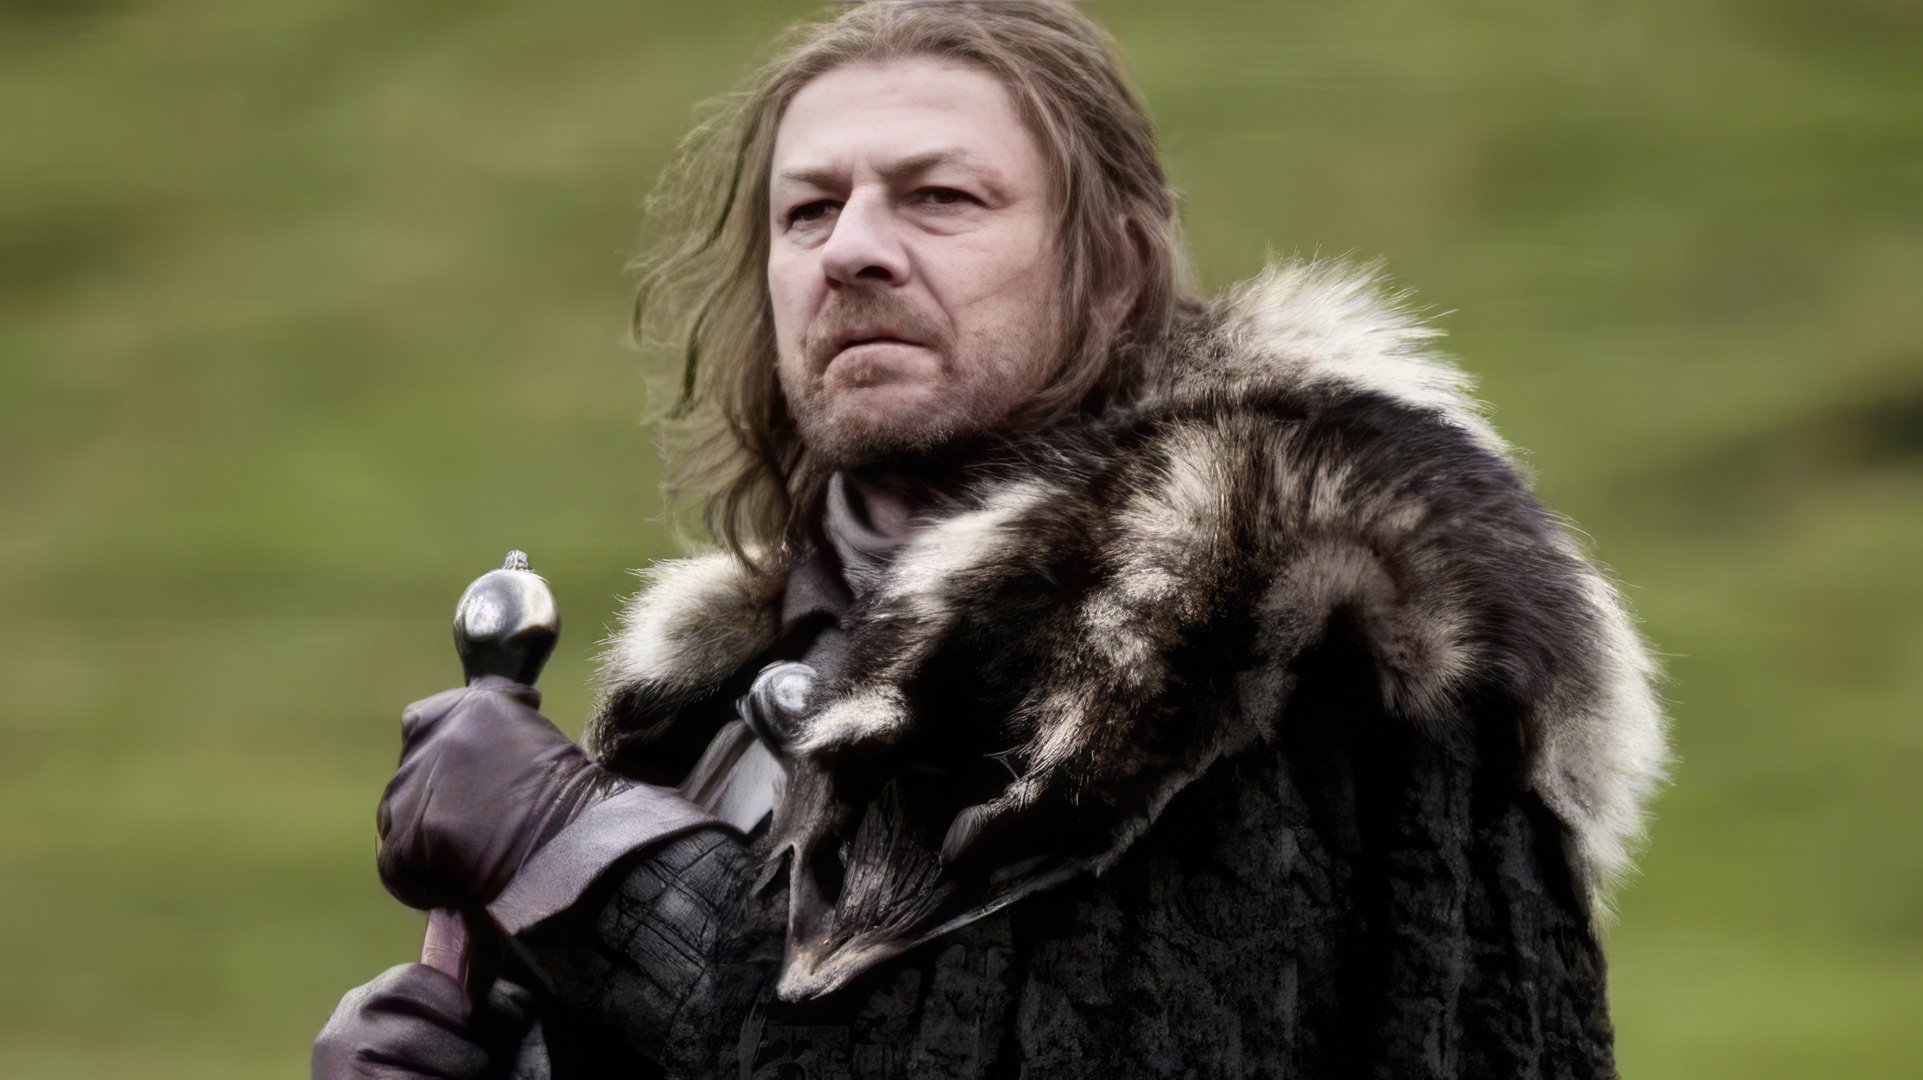 Sean Bean in the series 'Game of Thrones'